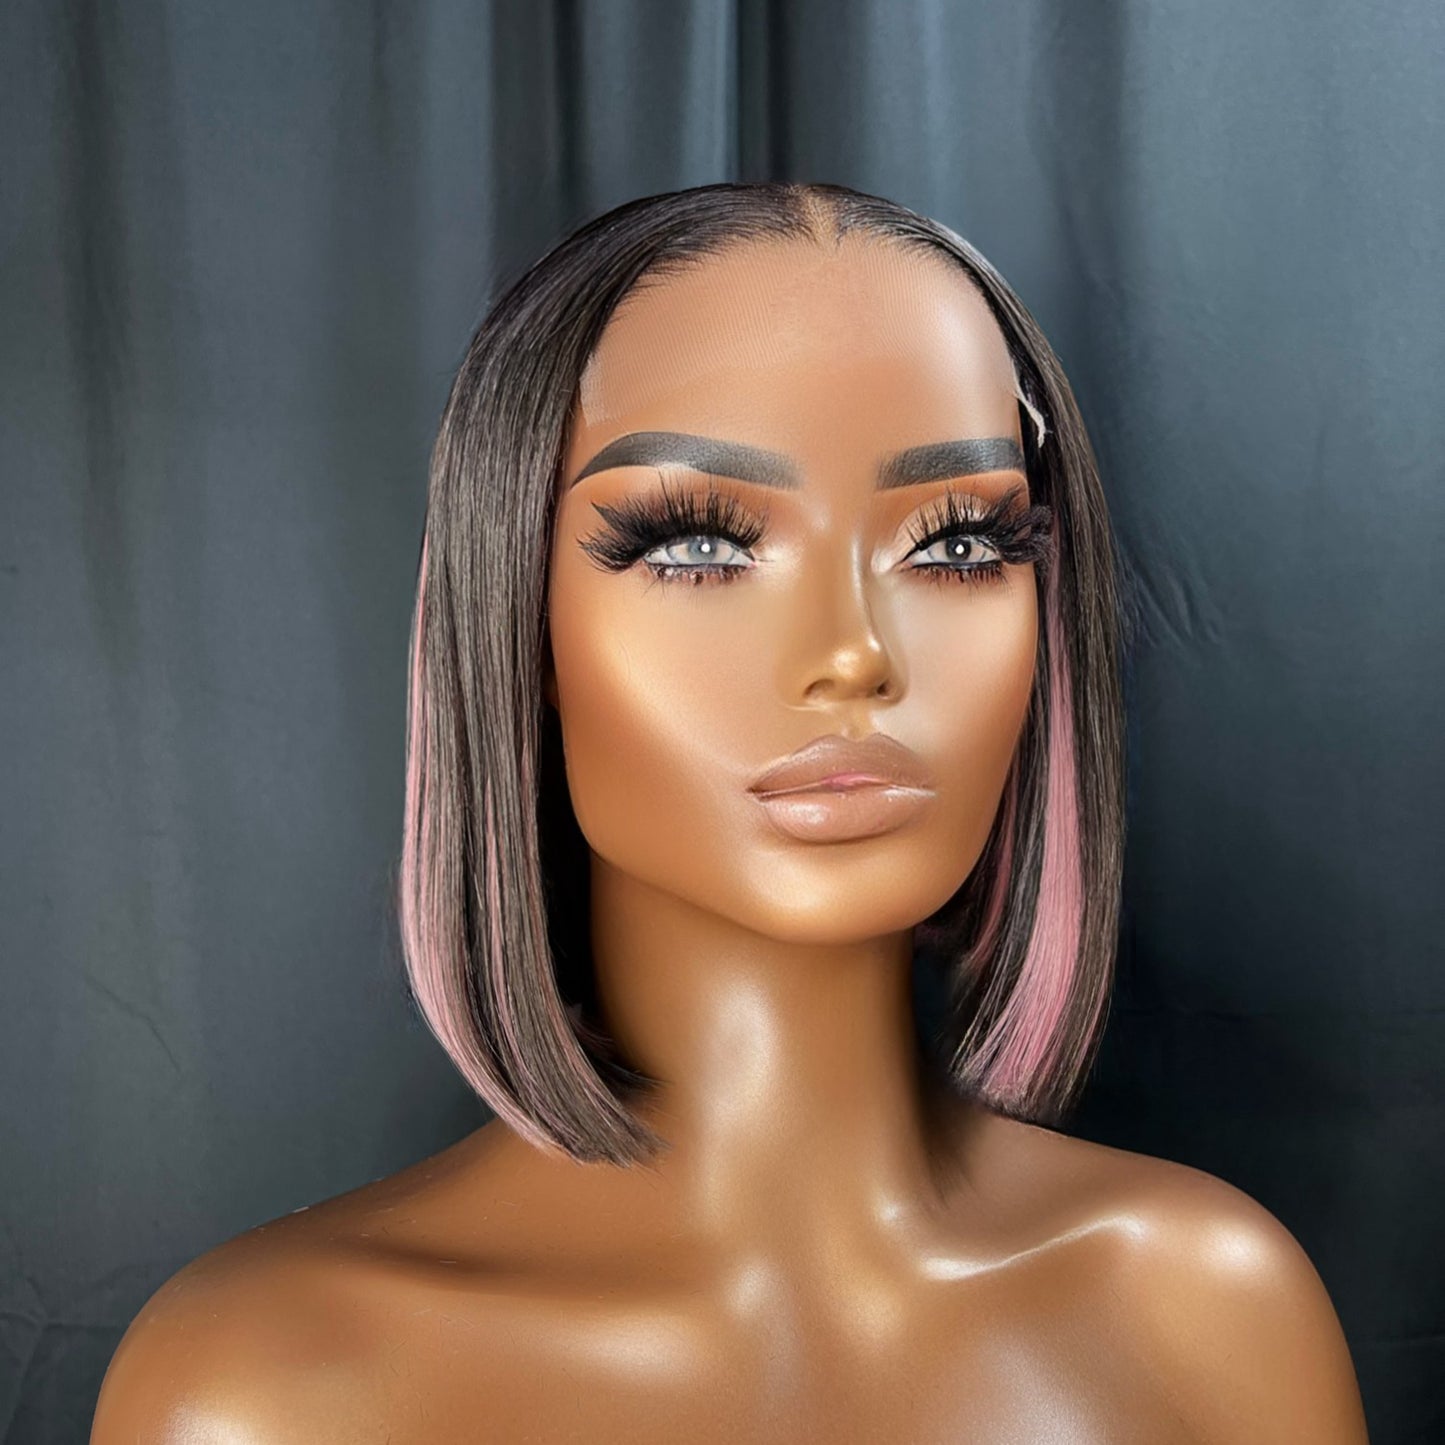 “CANDY” SHORT READY TO WEAR WIG, 5X5 HD LACE CLOSURE WIG, 12 INCH HUMAN HAIR WIG, READY TO SHIP WIG